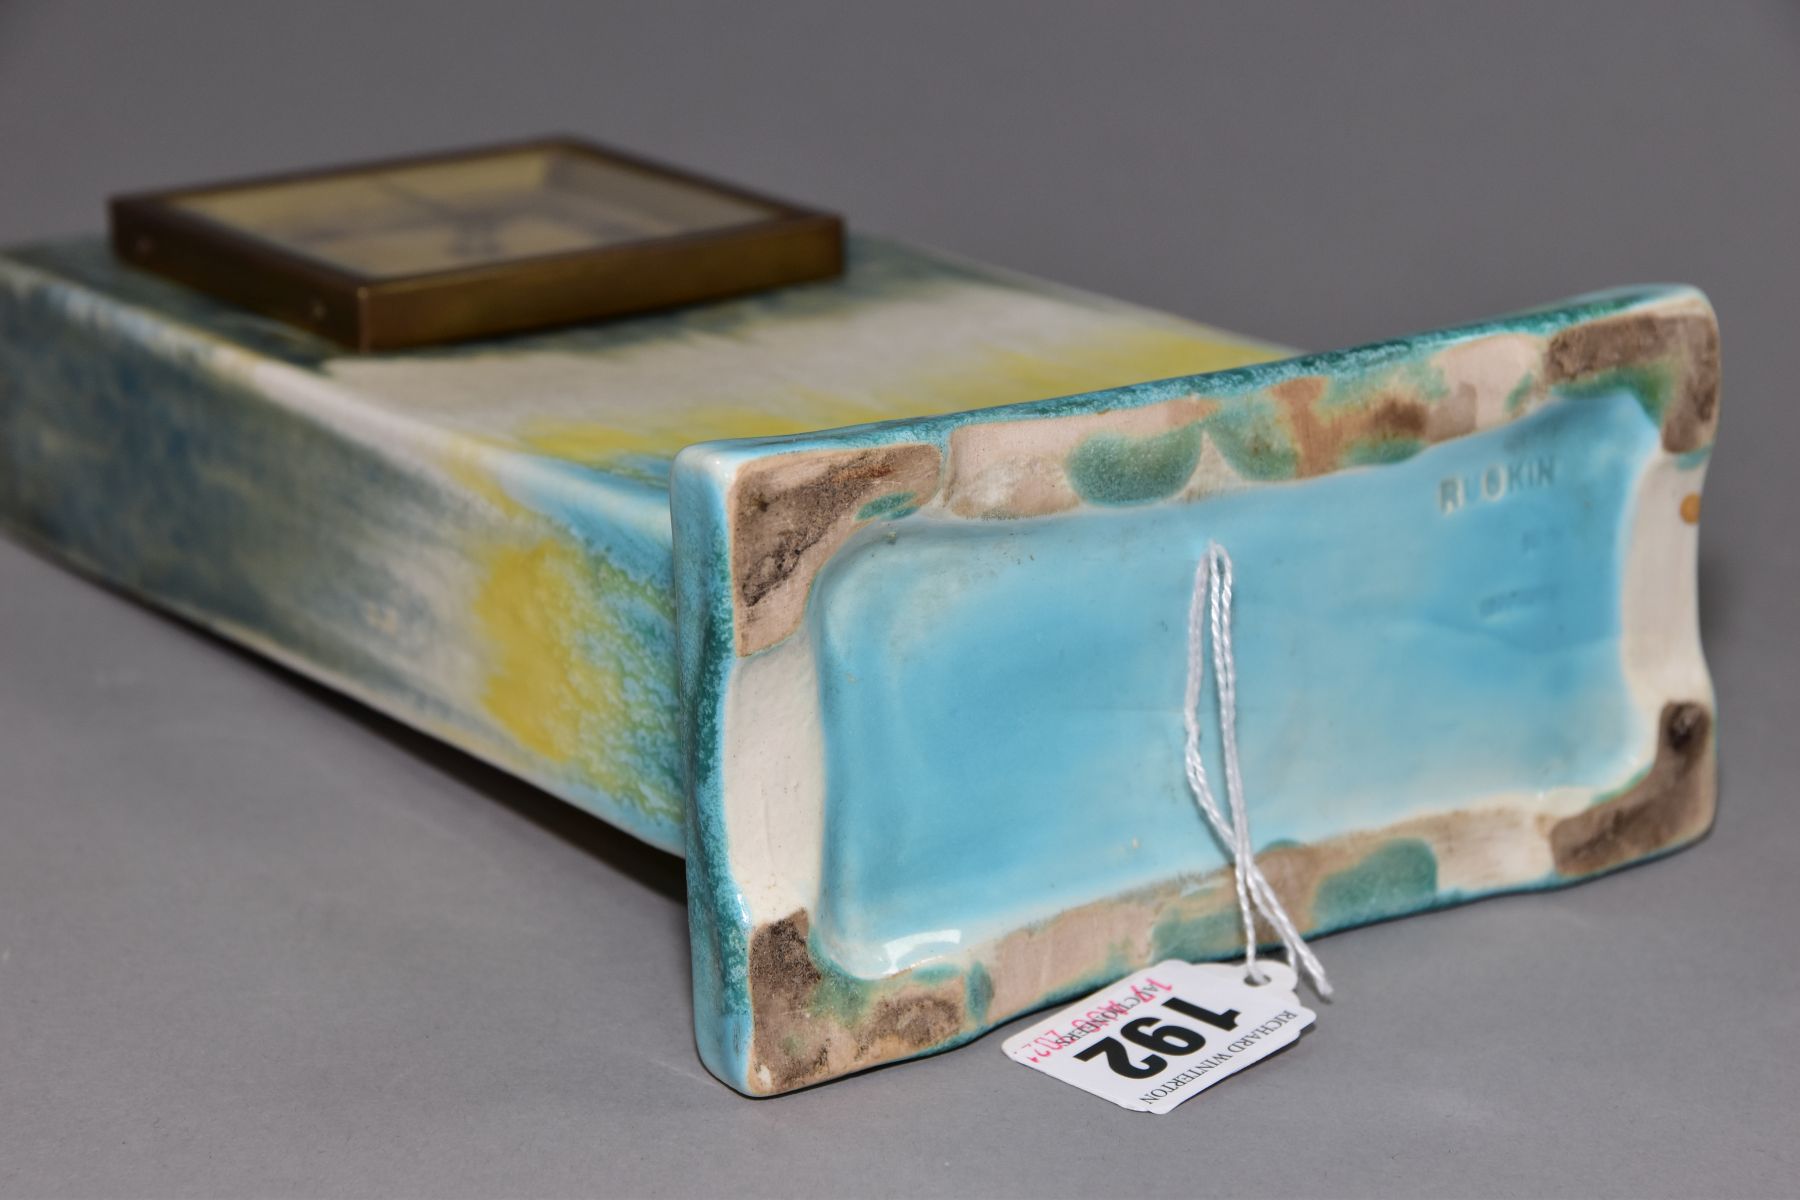 RUSKIN POTTERY, a rectangular clock case with flared base, matt green fading to white and yellow, - Image 5 of 5